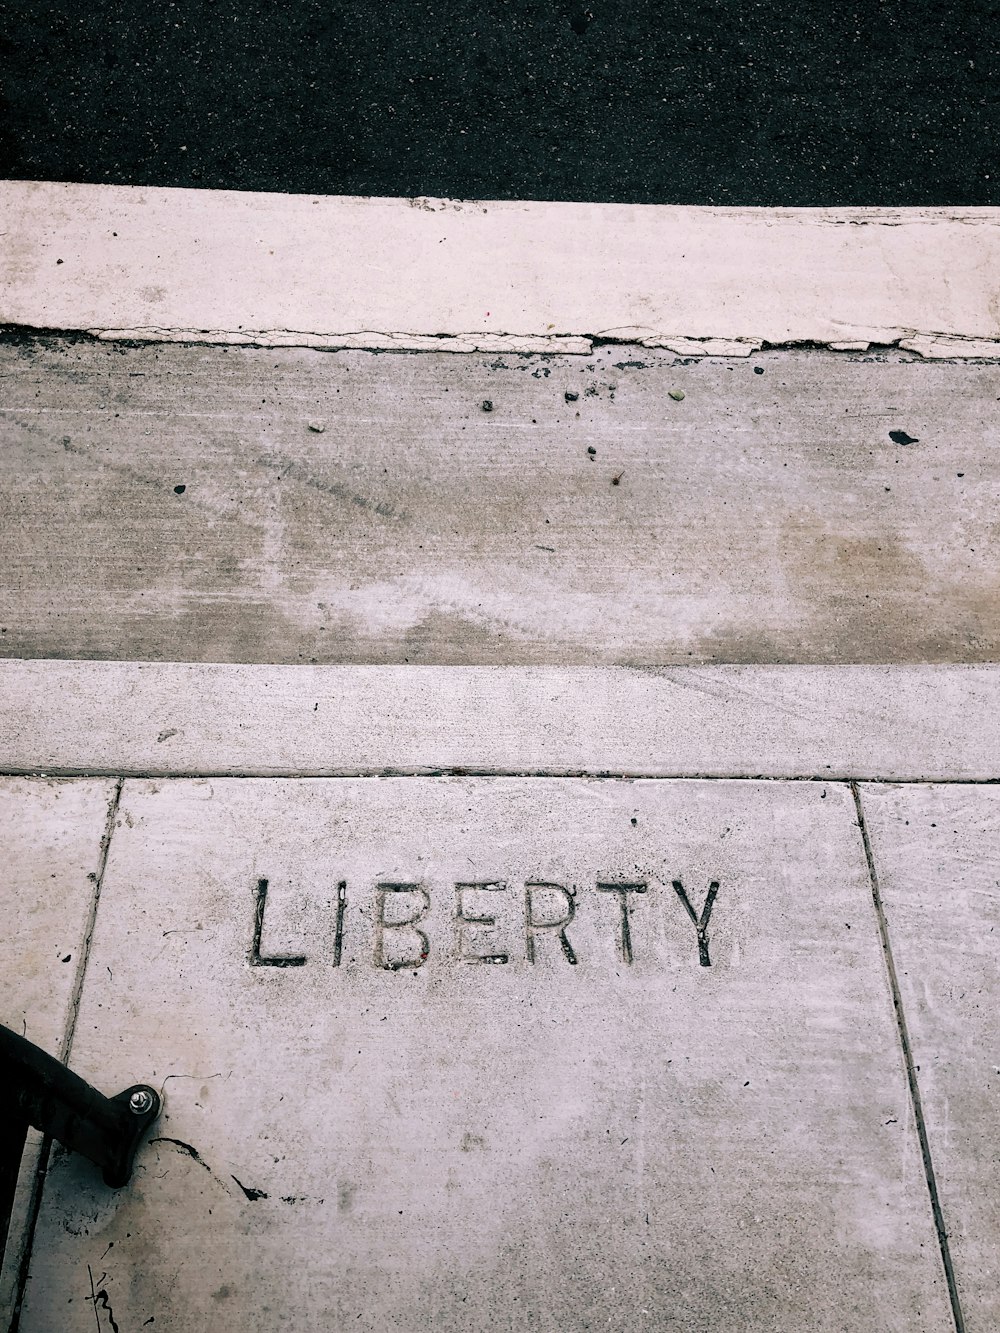 a sidewalk with the word liberty written on it